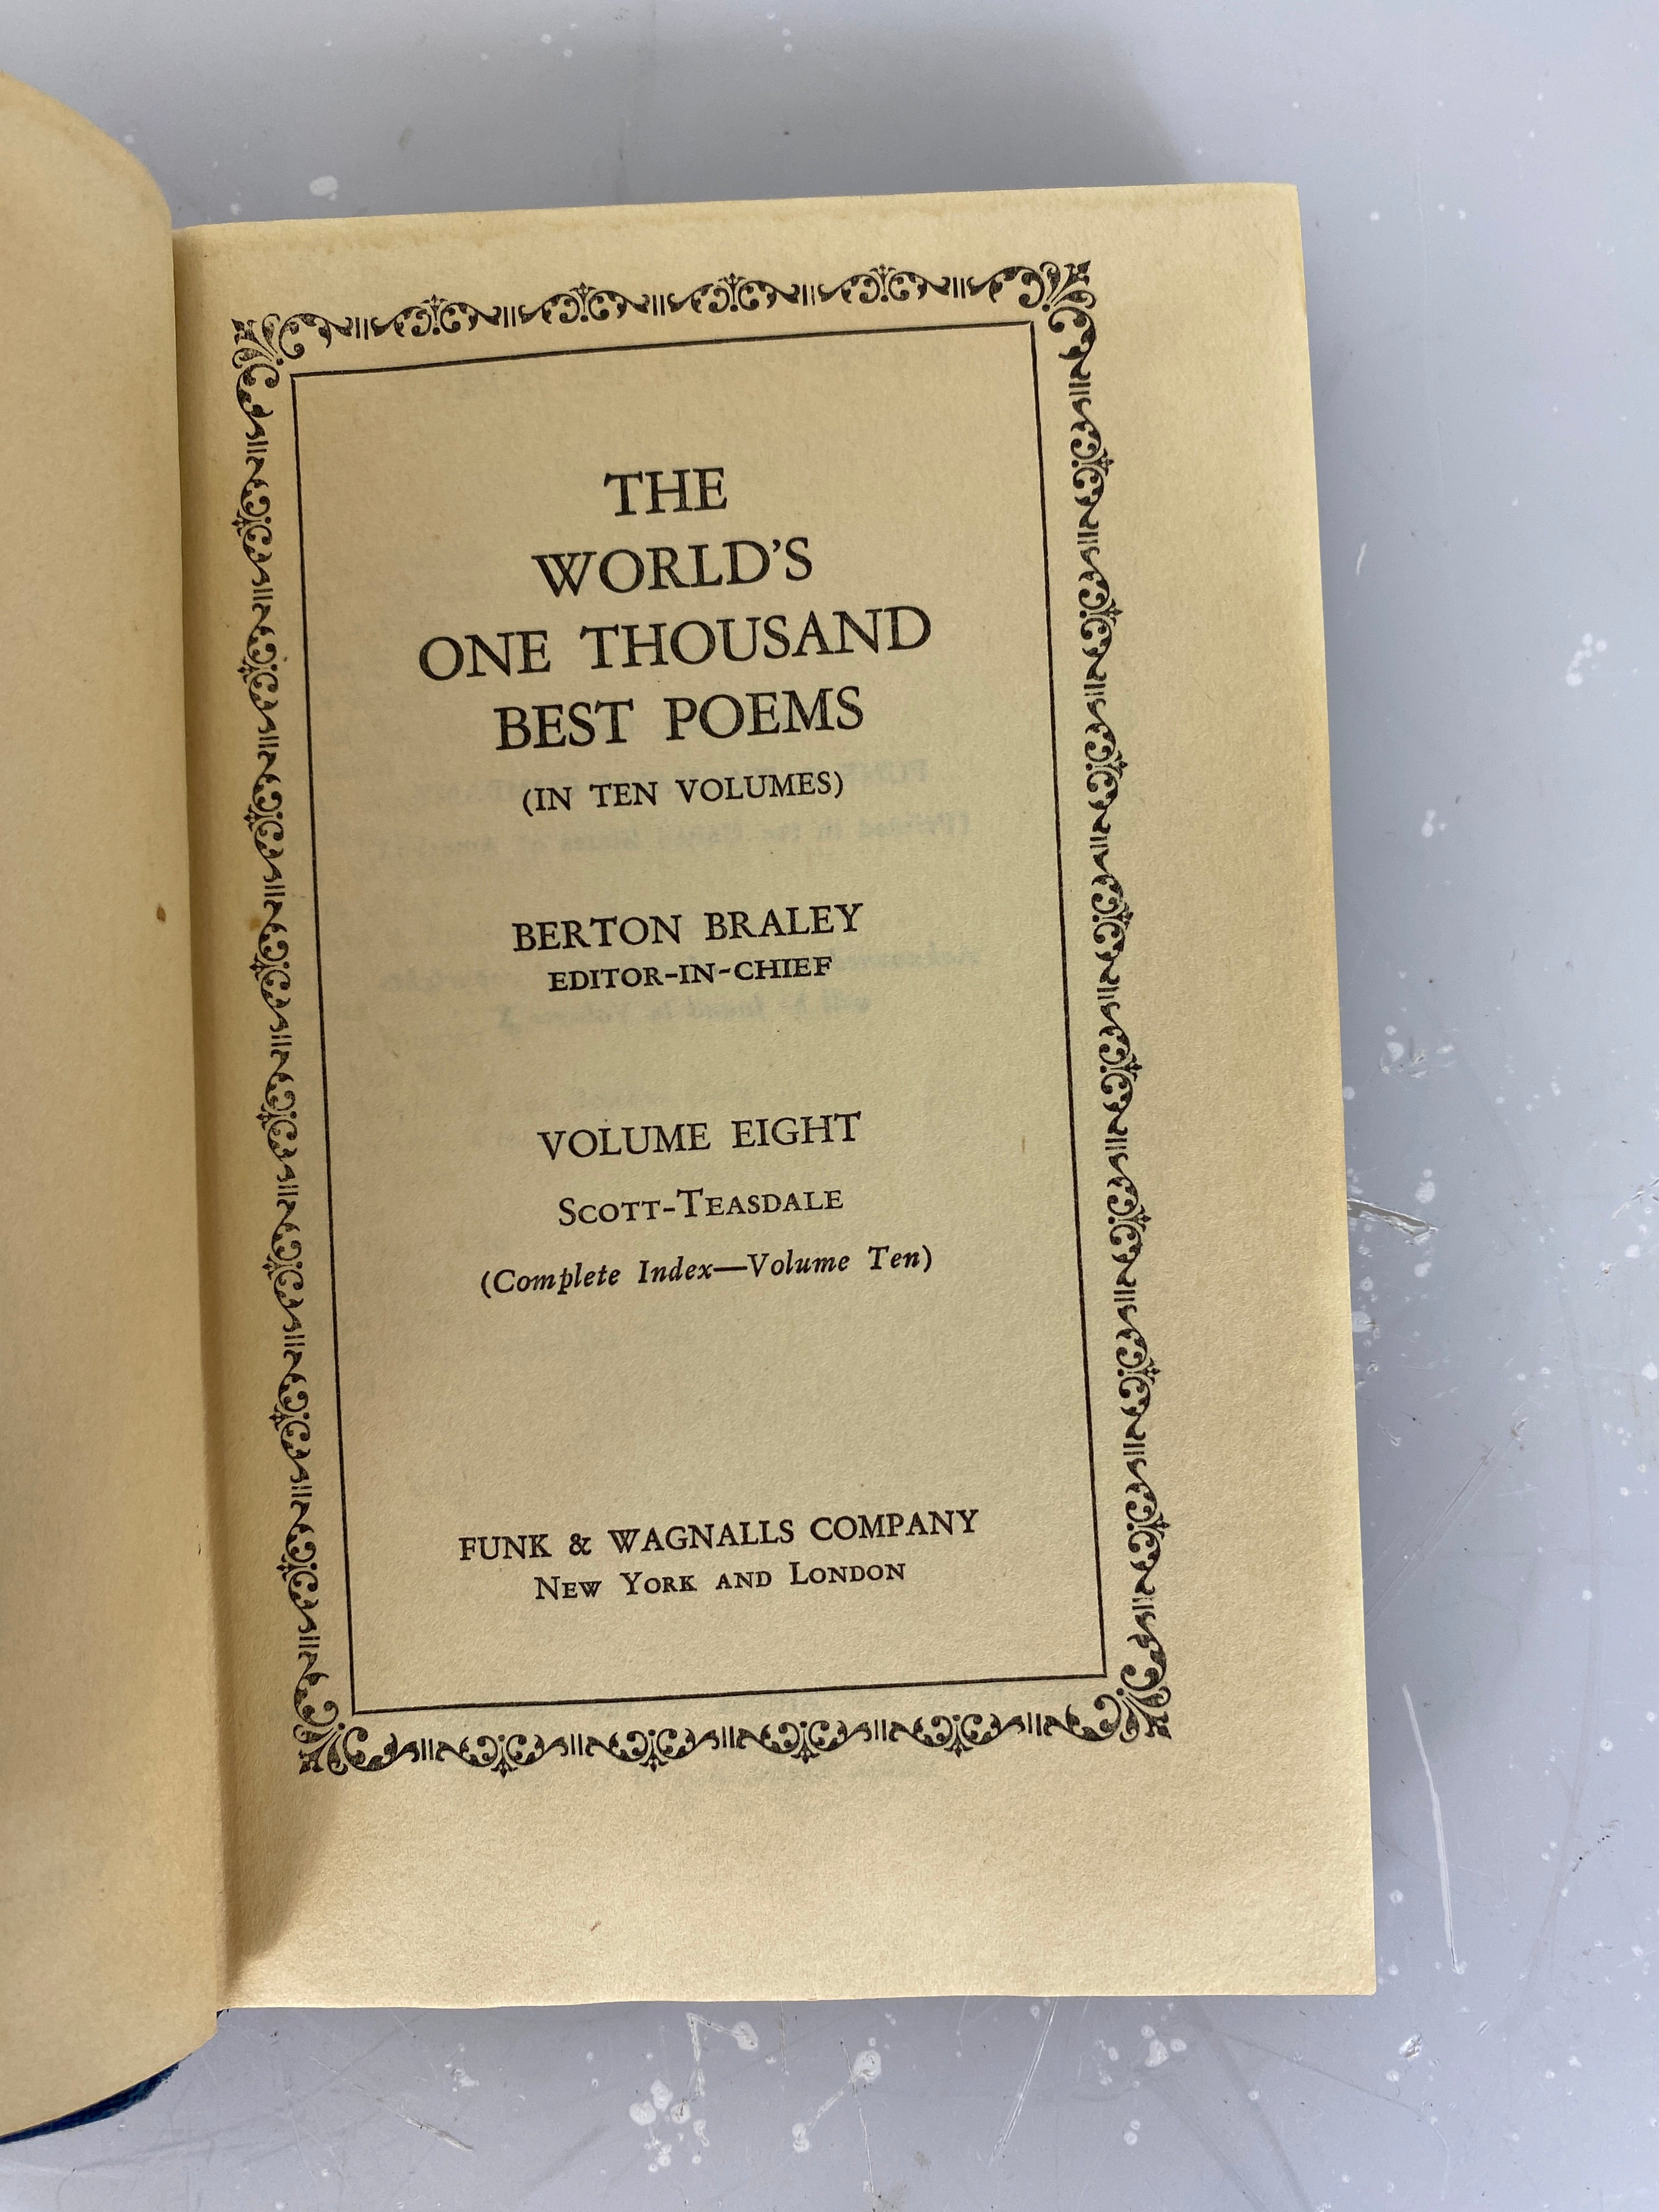 Lot of 5 Volumes of The World's One Thousand Best Poems by Berton Braley (Volumes 2, 5, 6, 7, 8) HC